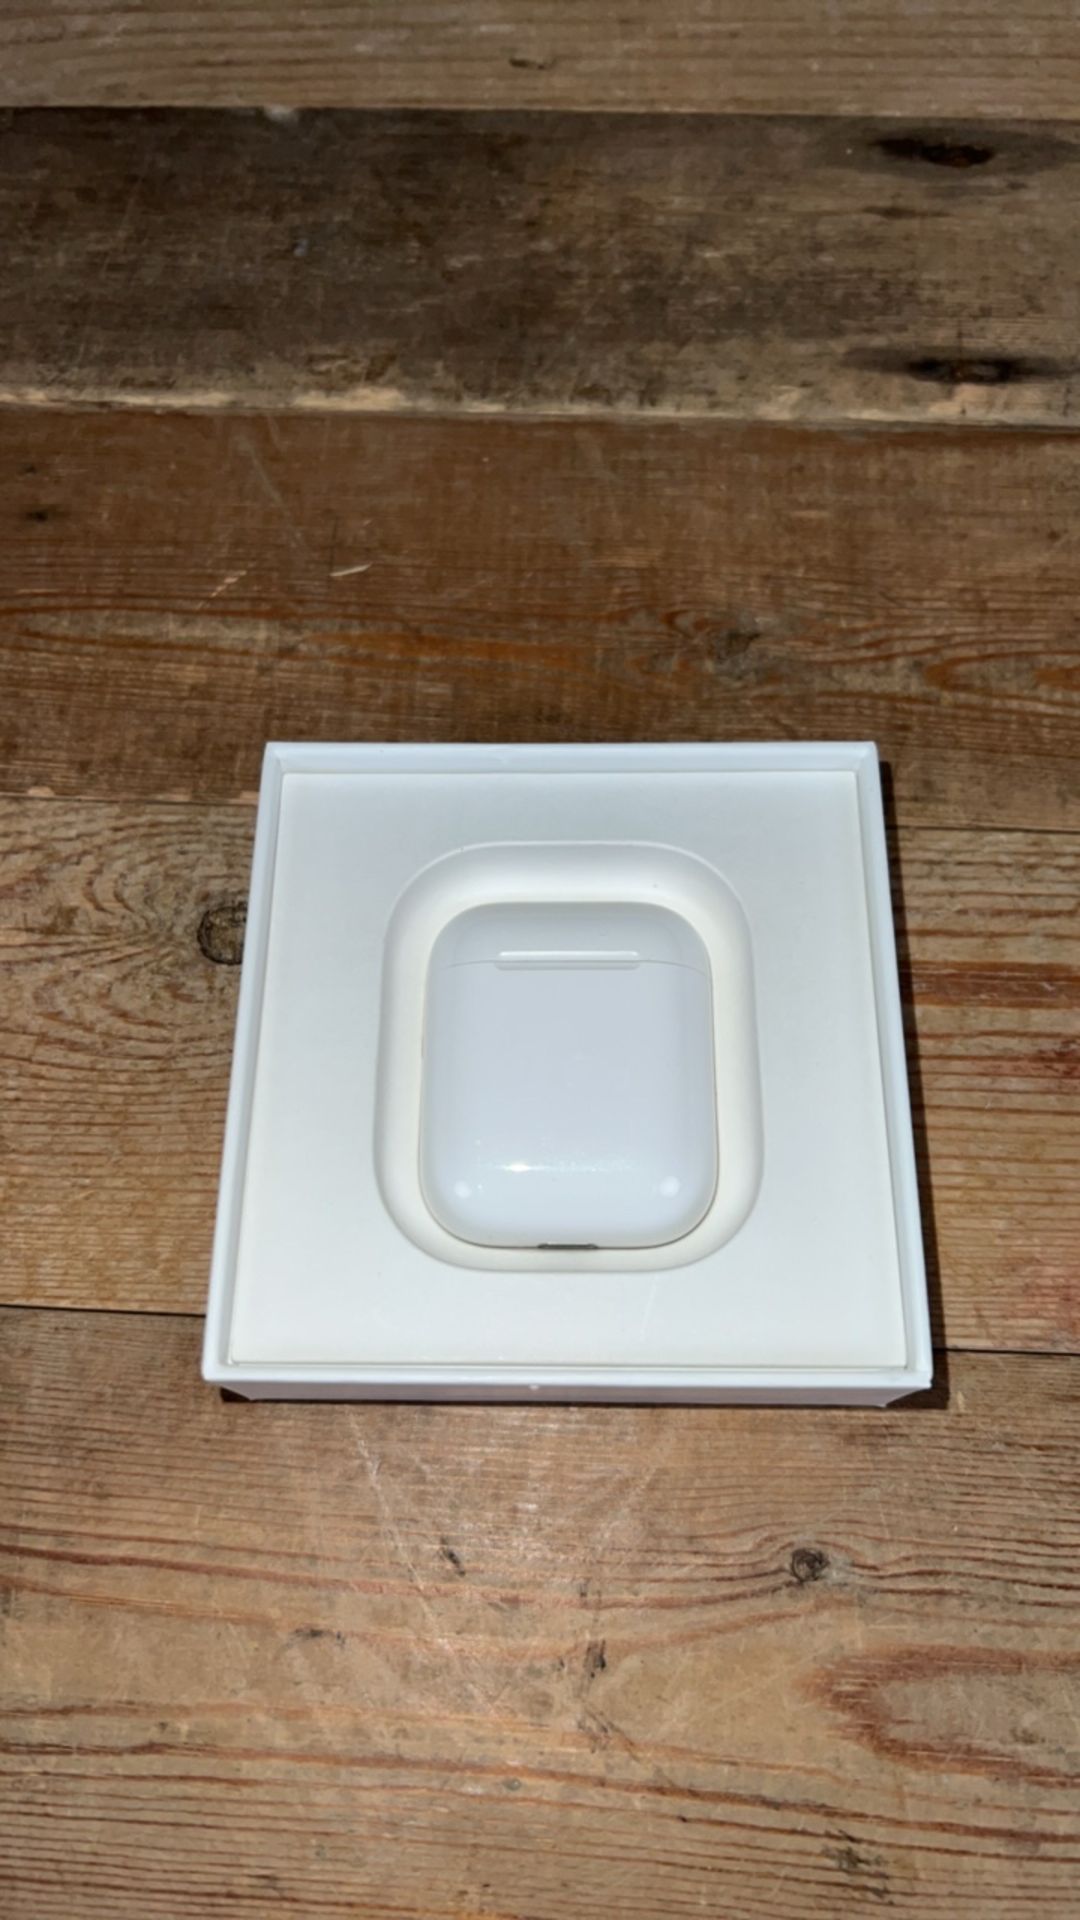 Apple Air Pods Charging Case Included - Image 3 of 5